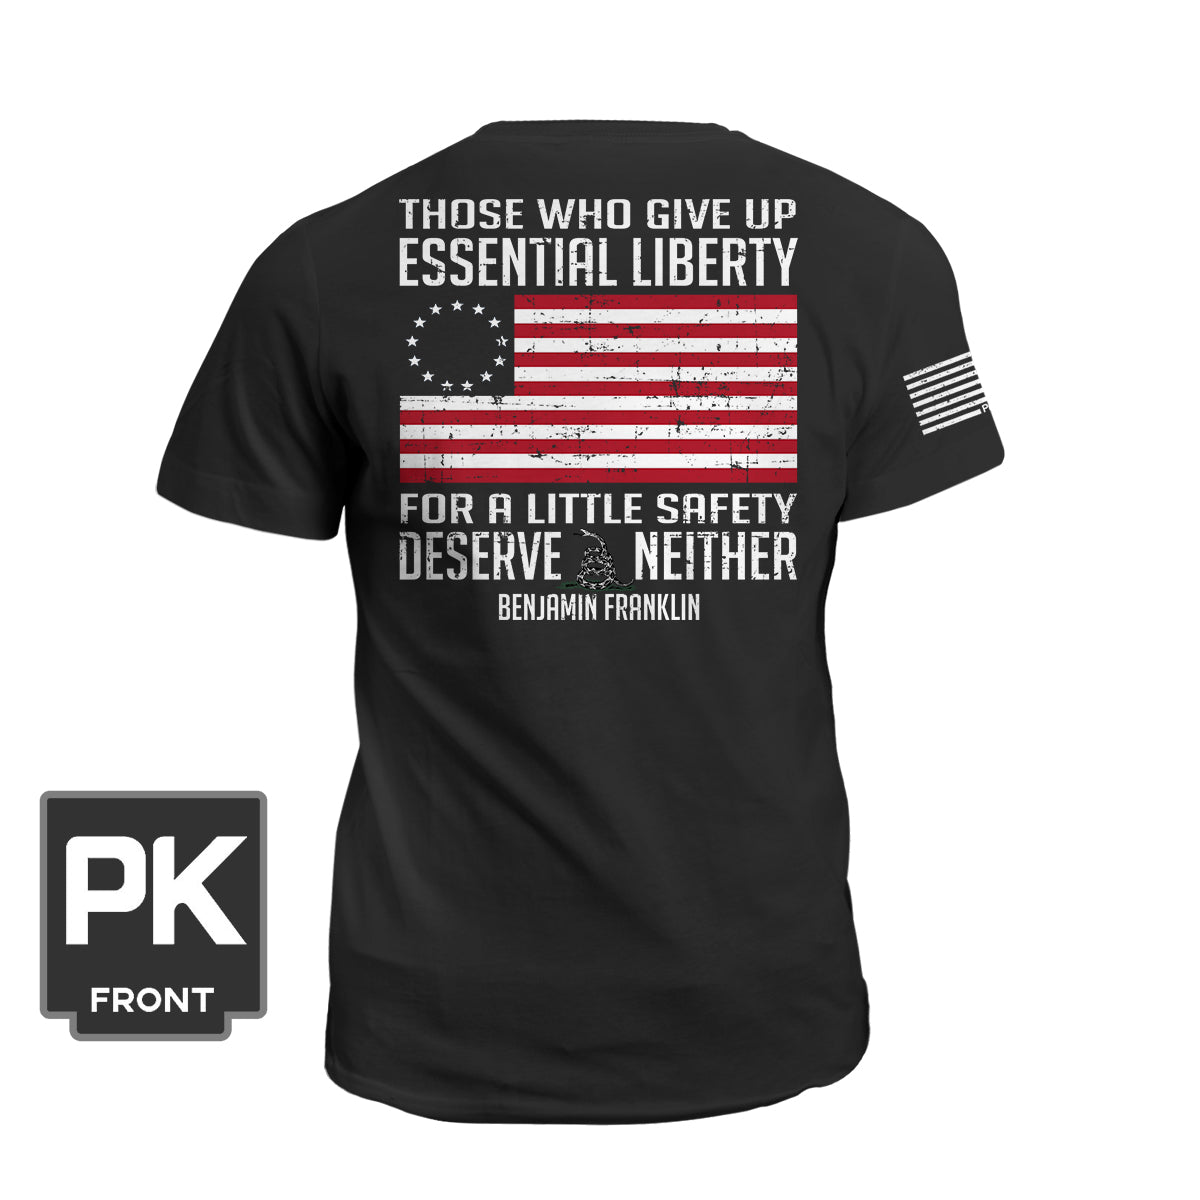 Those Who Give Up Essential Liberty For A Little Safety Deserve Neither  Benjamin Franklin shirt